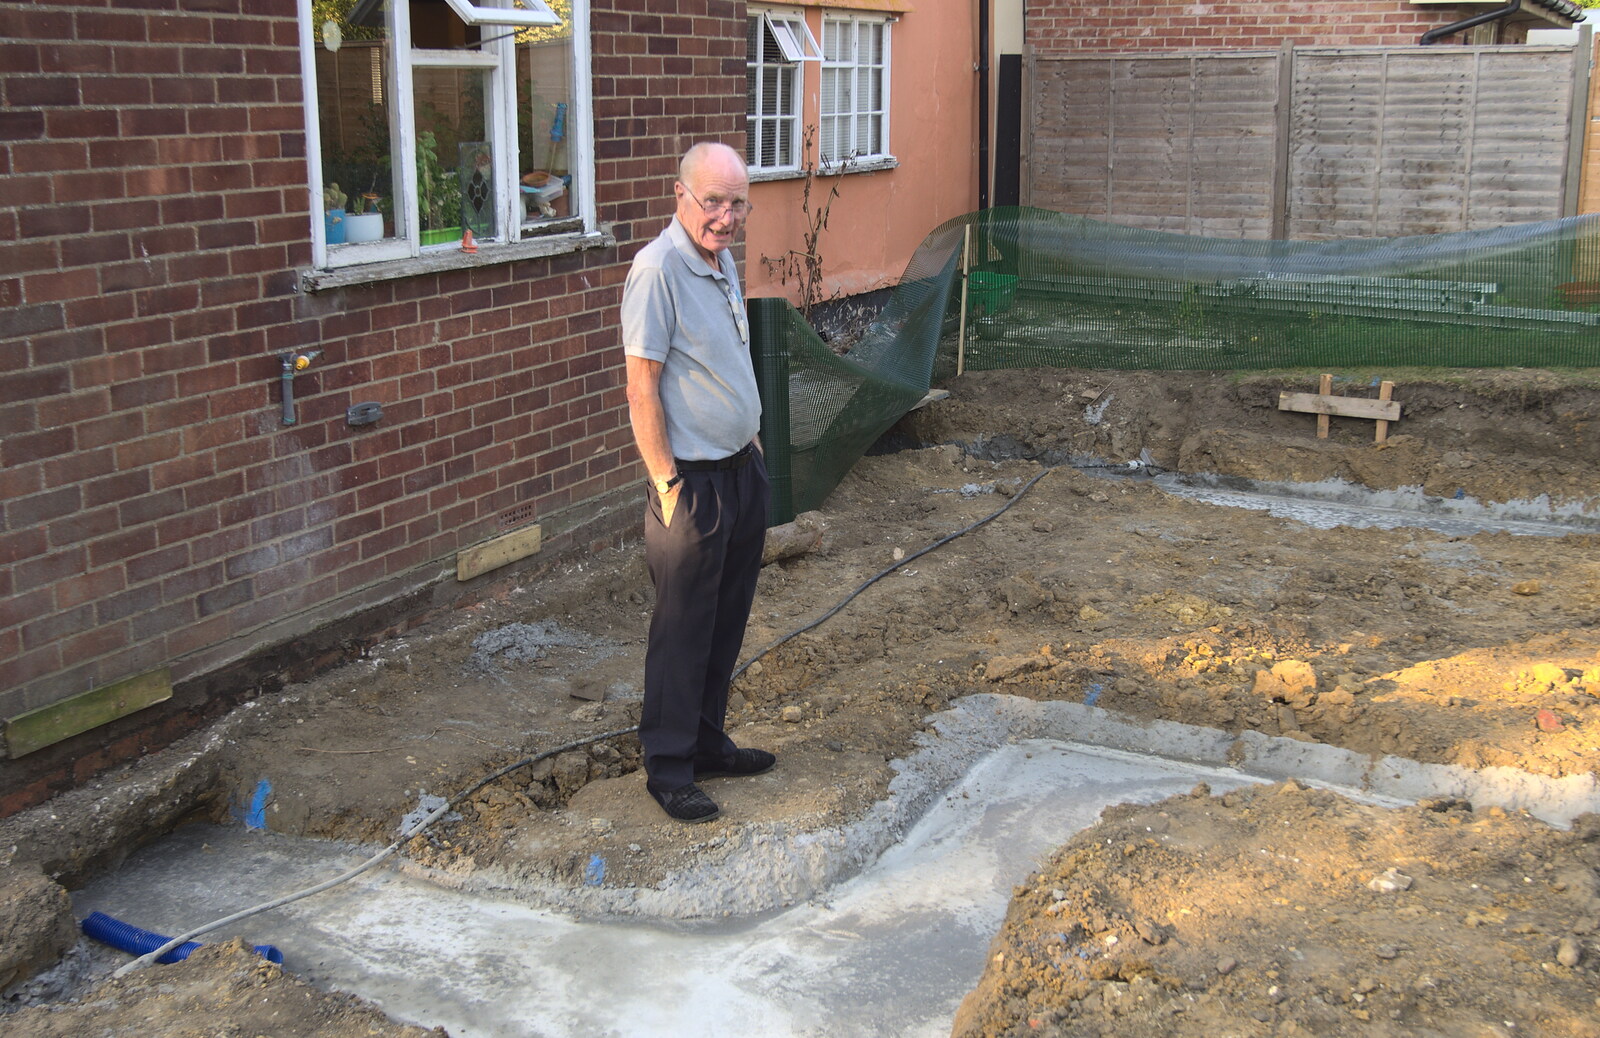 Grandad roams around in slippers from Grand Designs: Building Commences, Brome, Suffolk - 8th August 2013